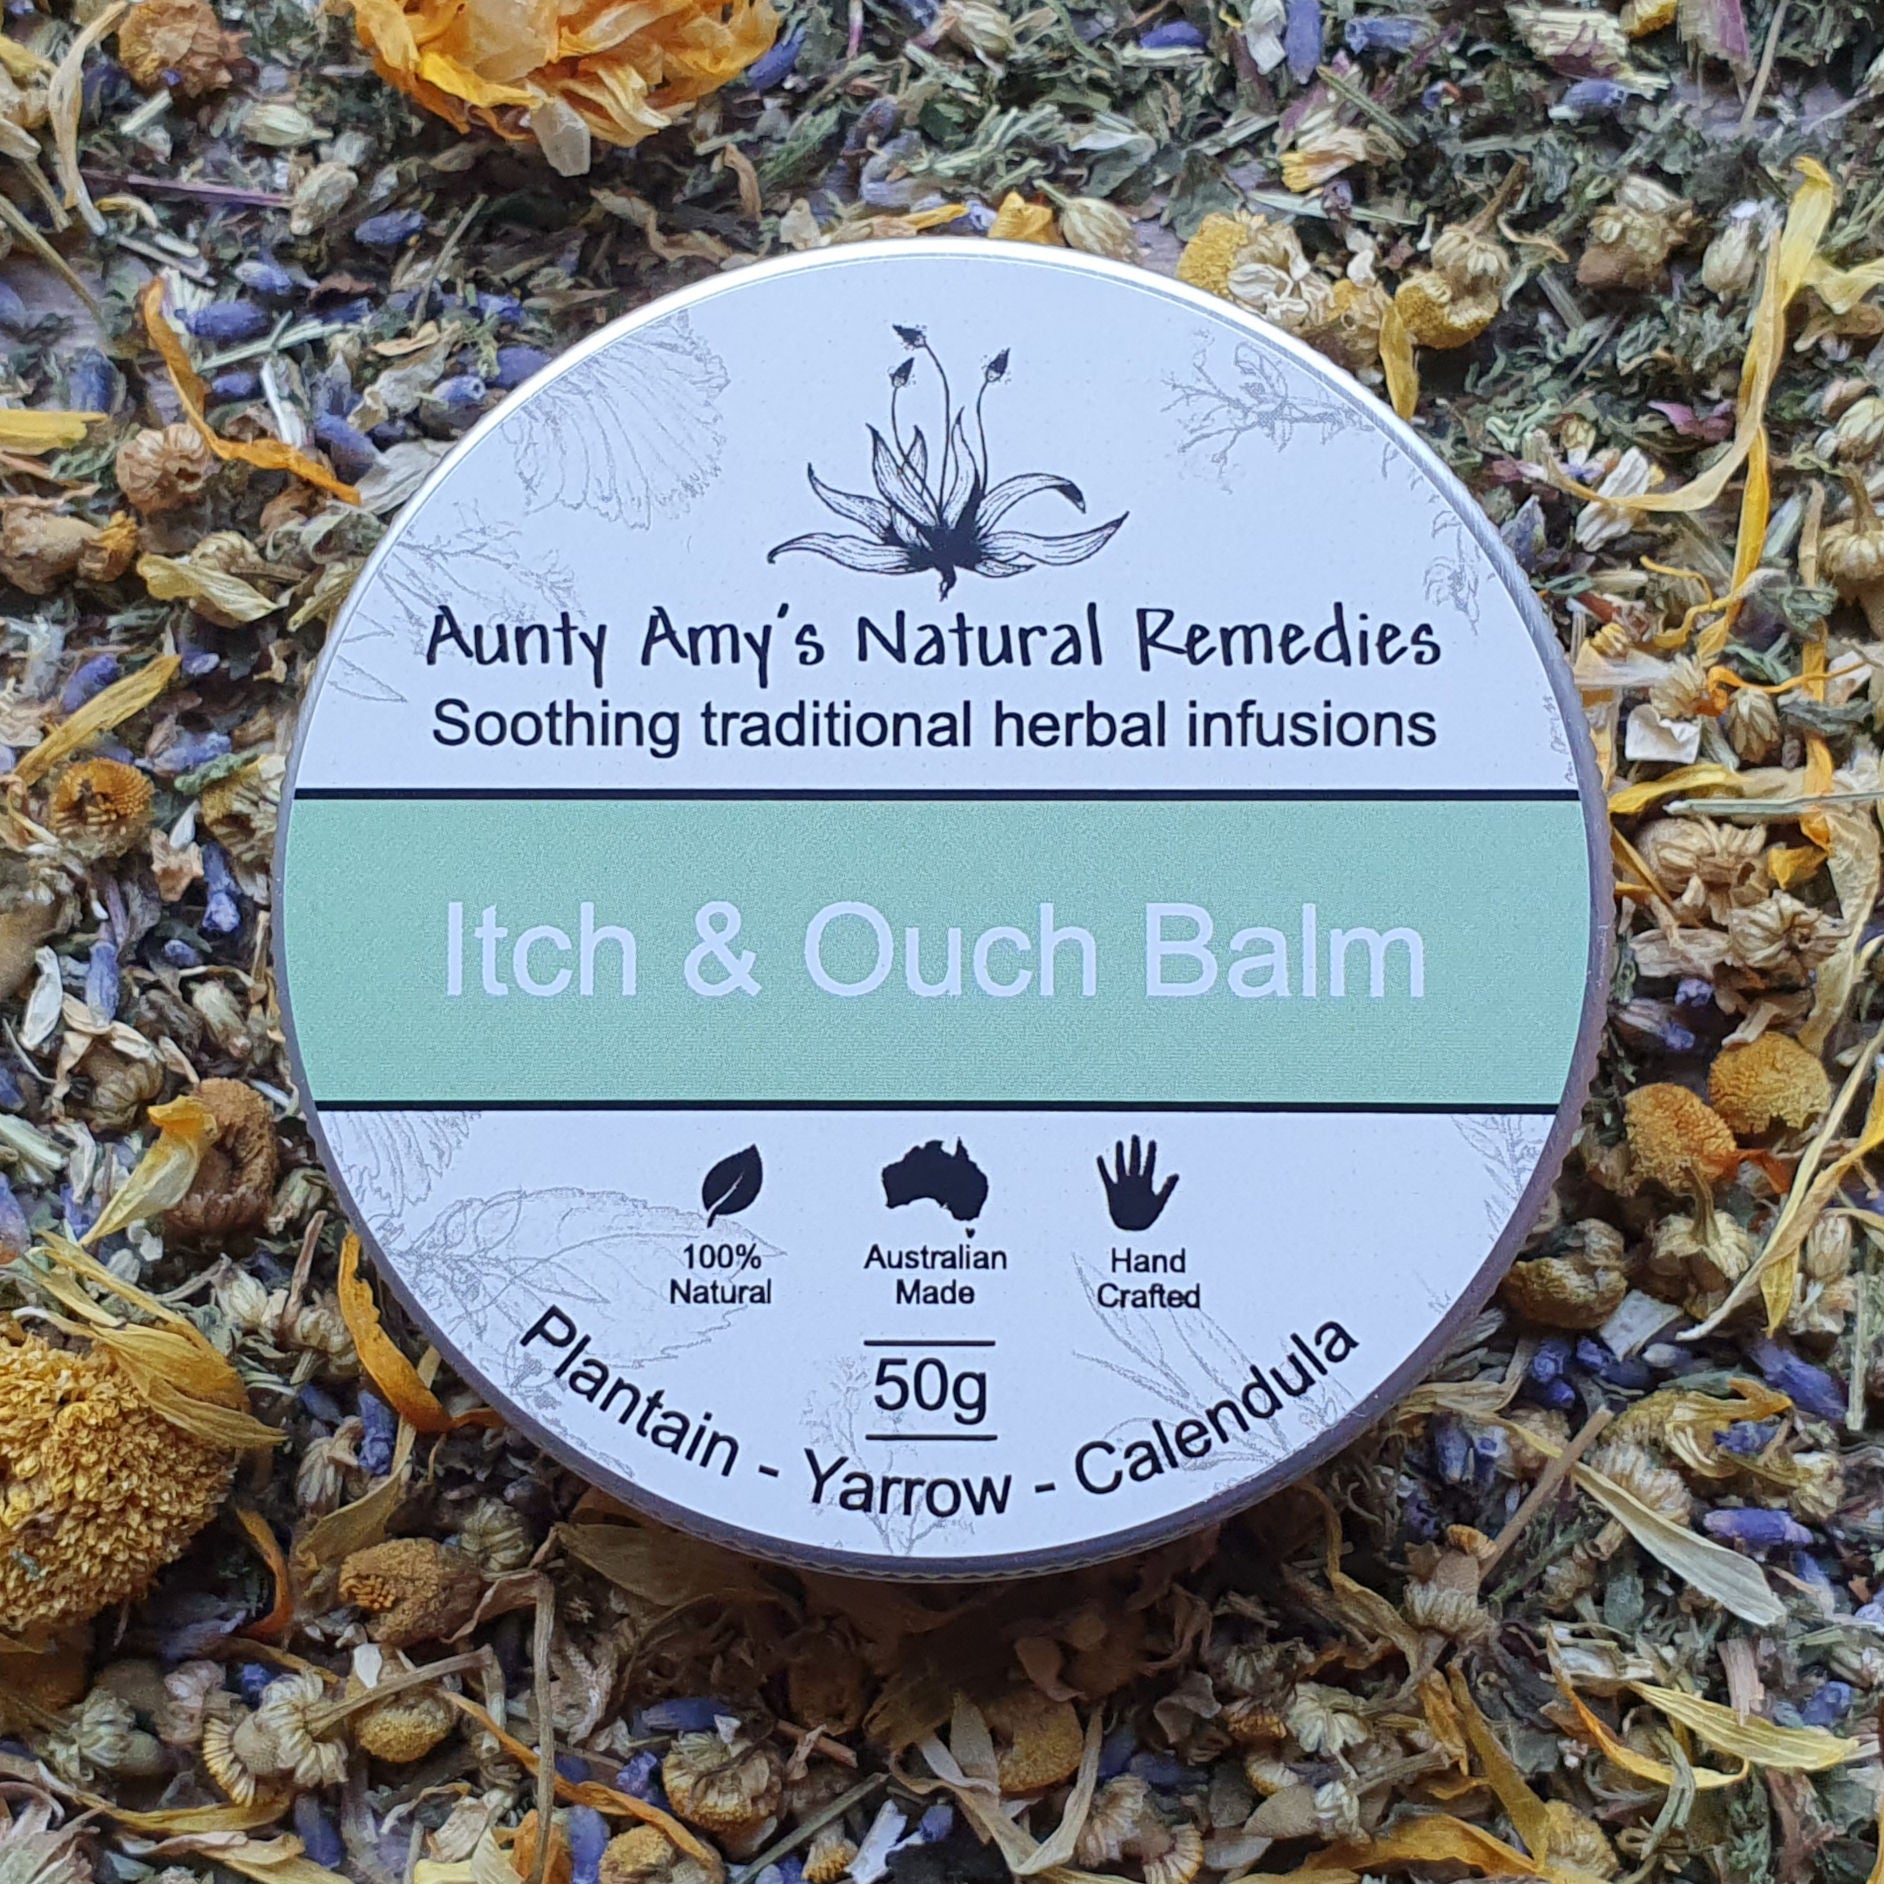 Aunty Amys - Natural Remedies Itch & Ouch Balm